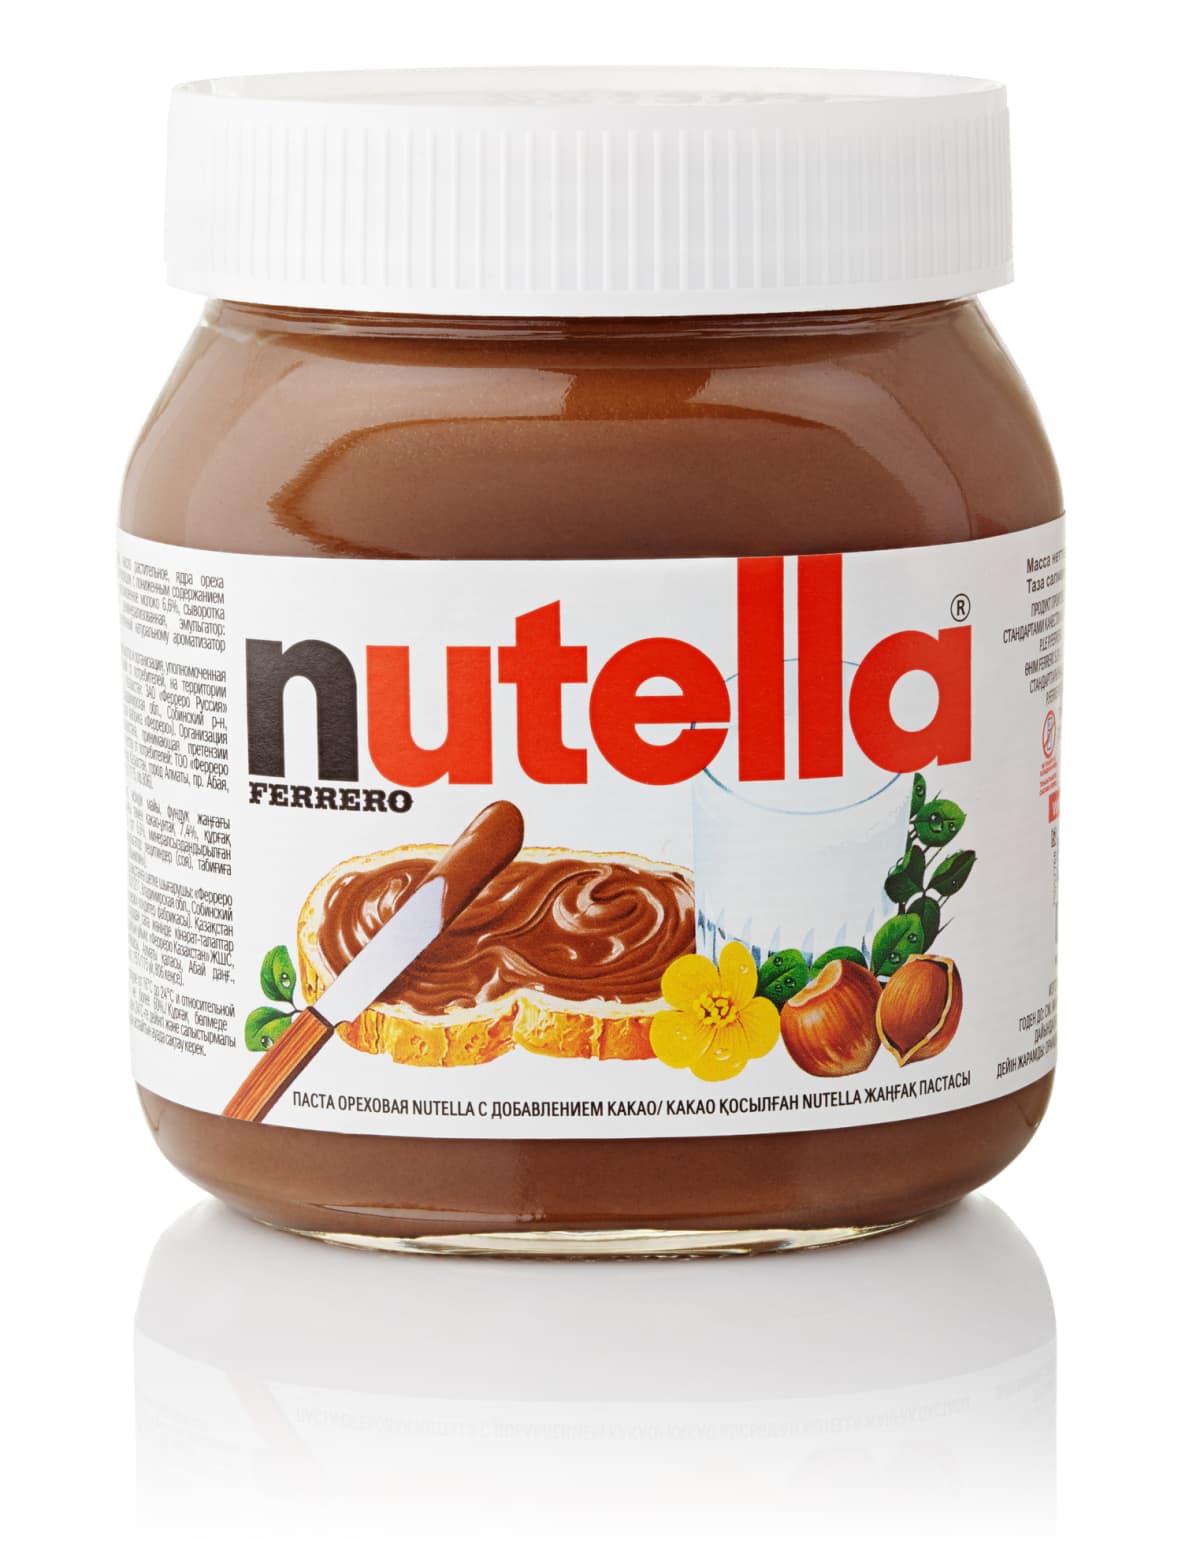 Jar of Nutella against a white background